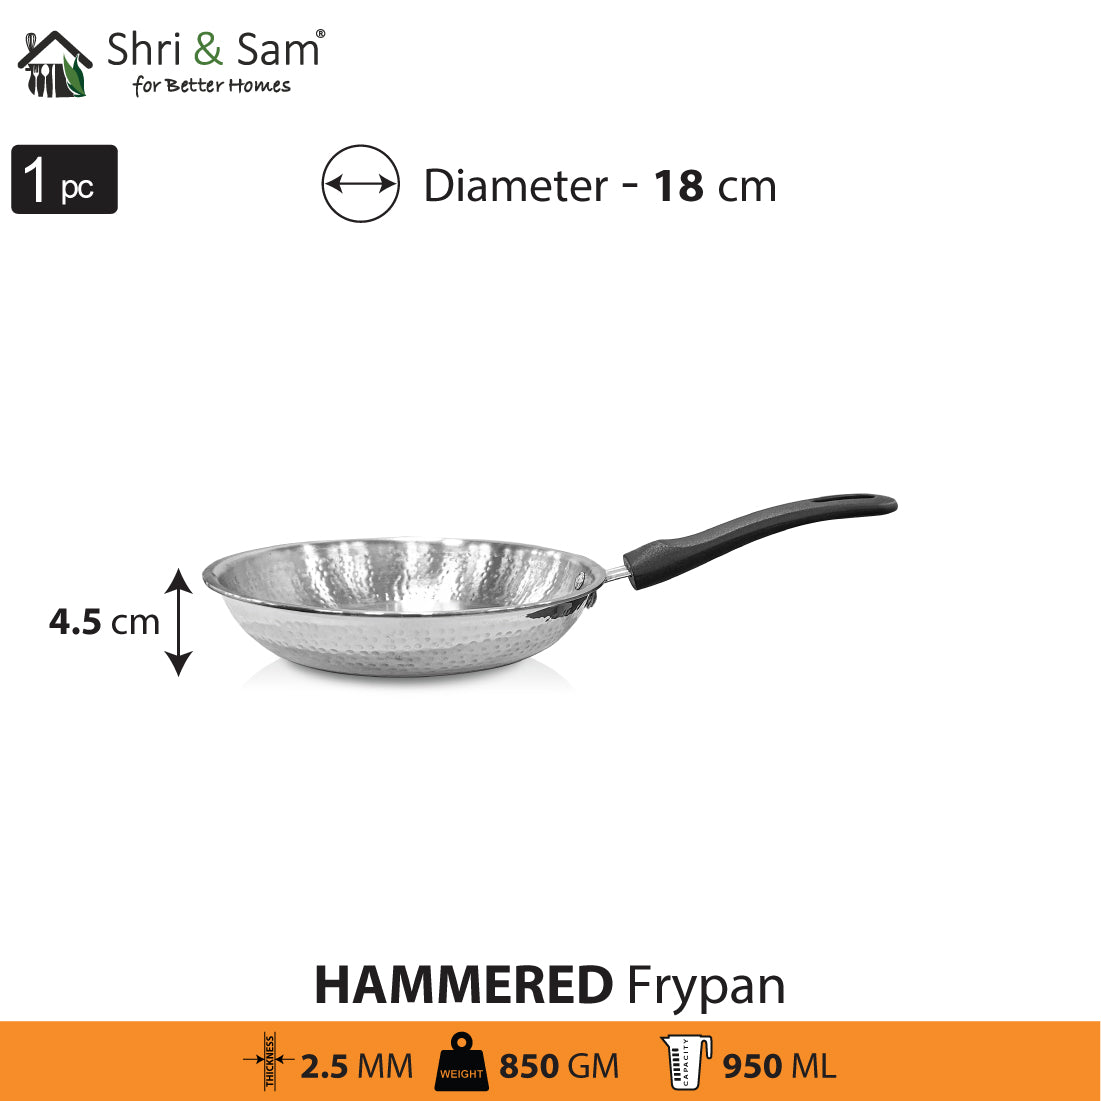 Stainless Steel Heavy Weight Hammered Fry Pan